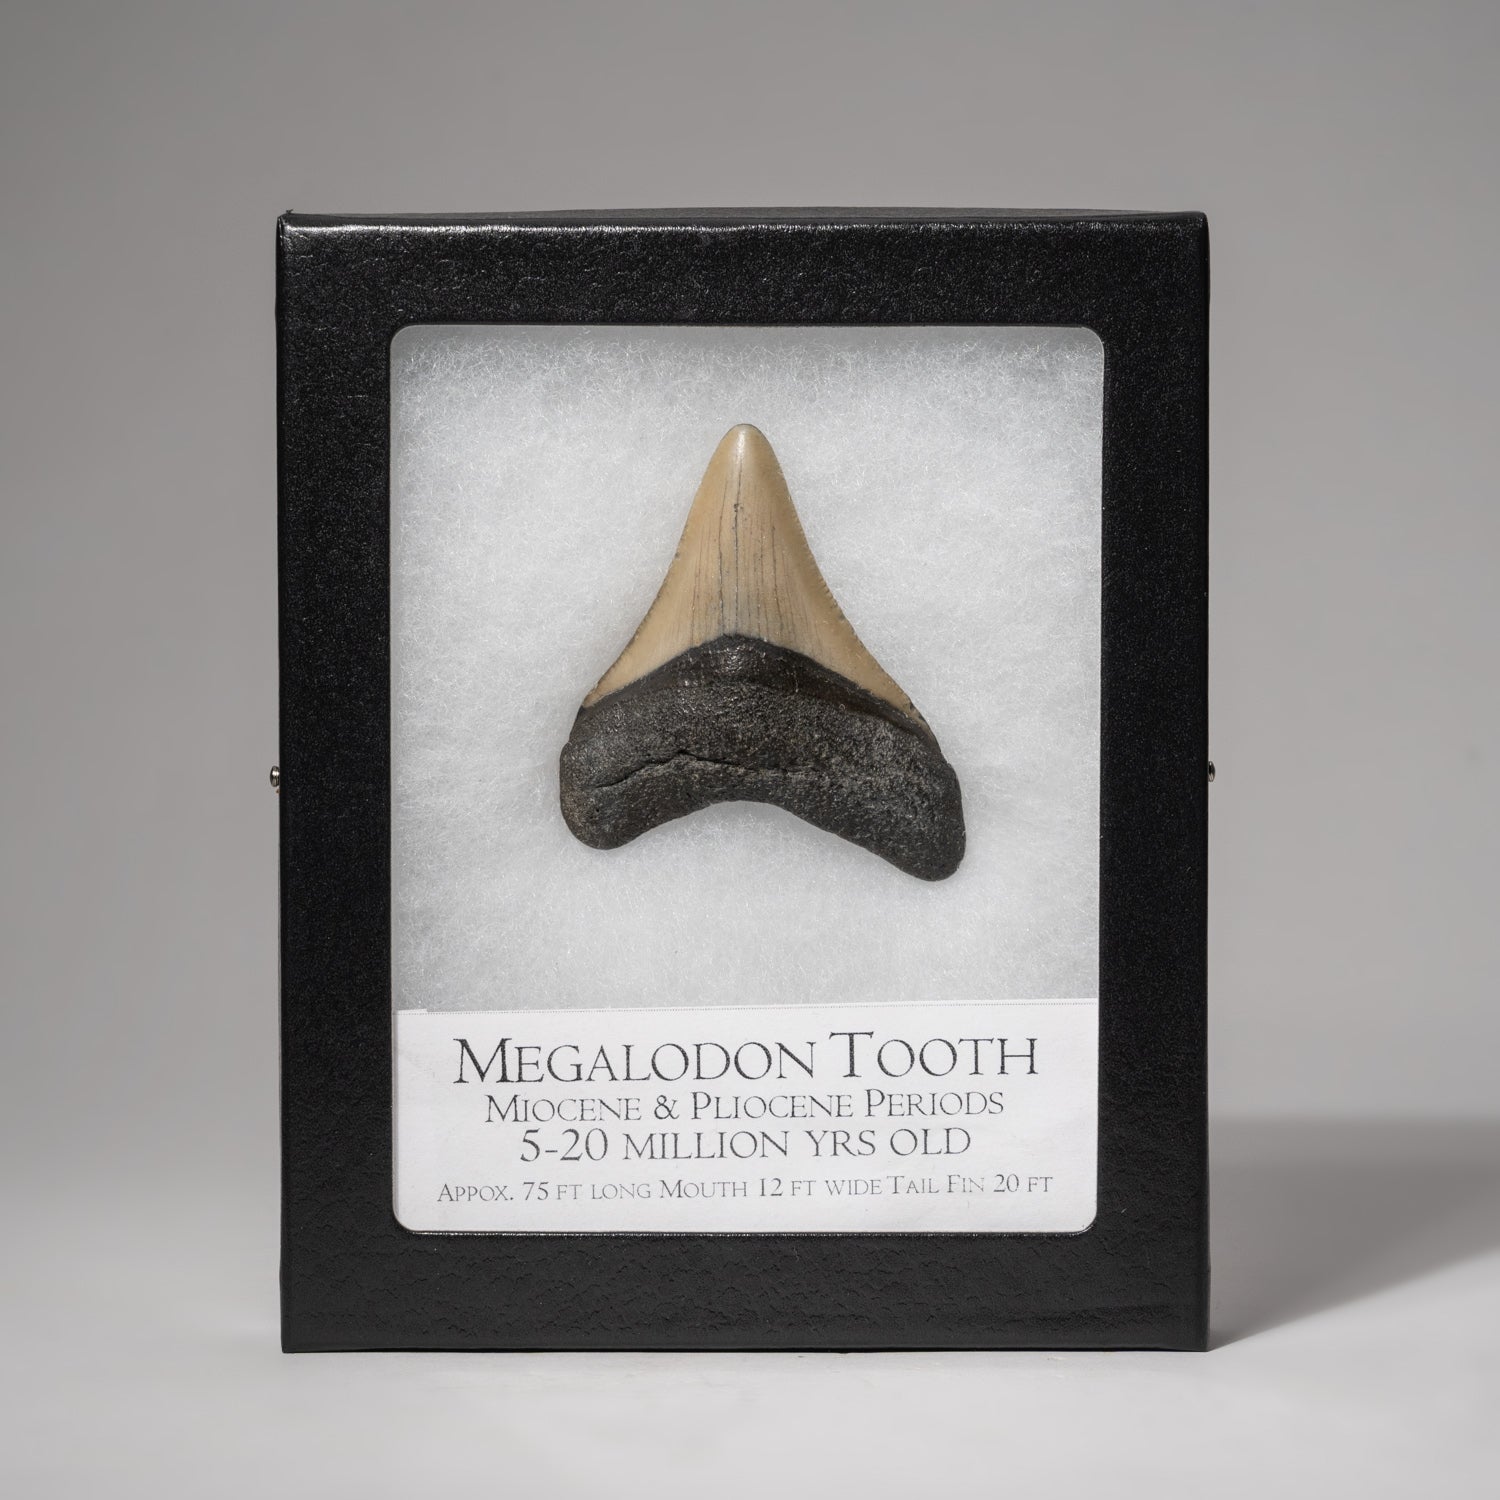 Genuine 2-3" Megalodon Shark Tooth in Display Box (.5 lbs)